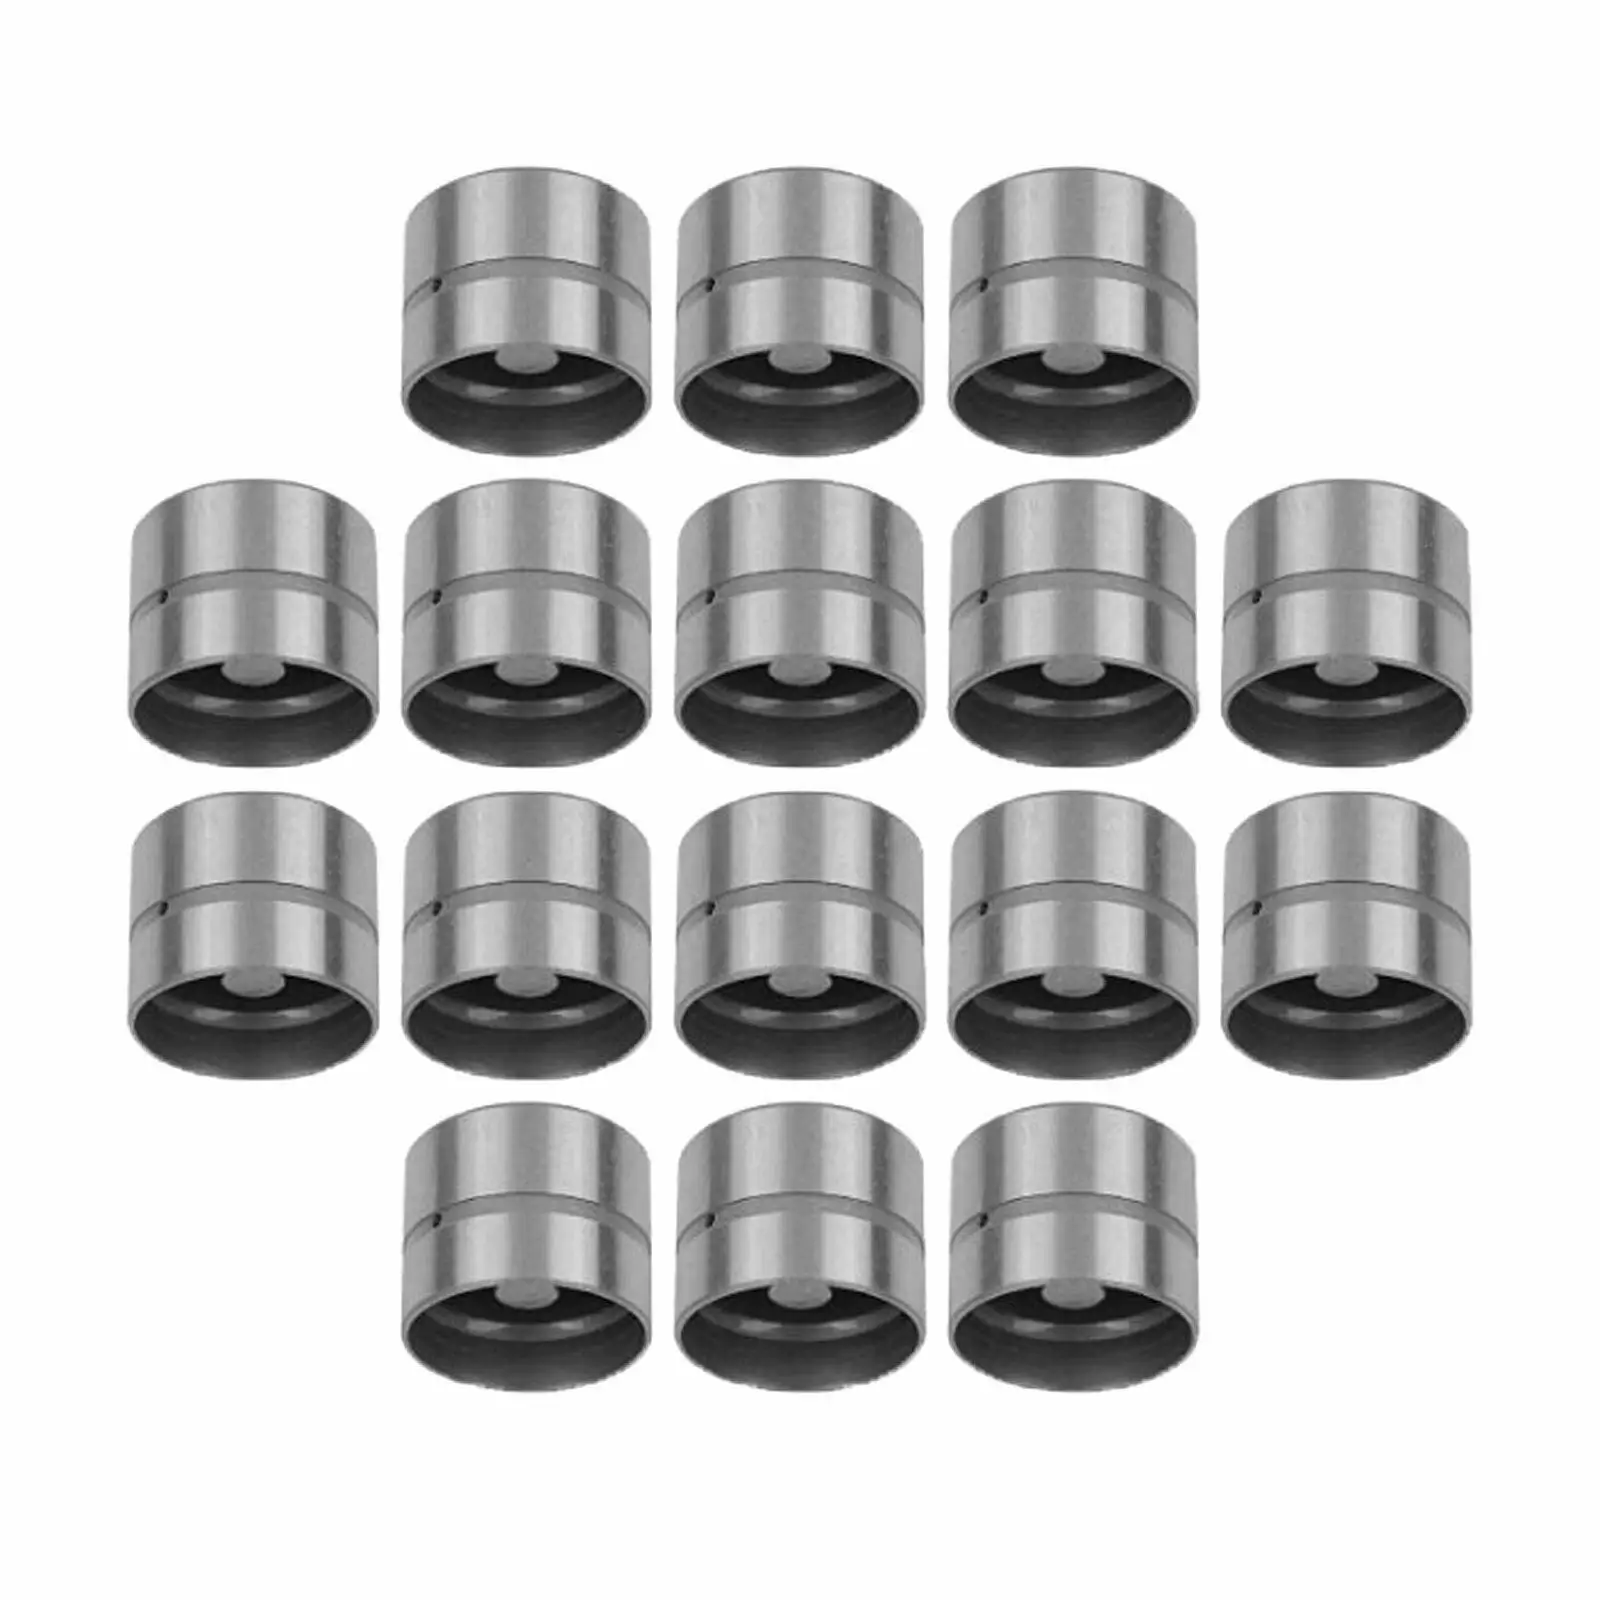 16Pcs Hydraulic Lifters Tappets Spare Parts Replacement Valves Parts Repair Accessories for 20XE C20XE 420011810 90570967